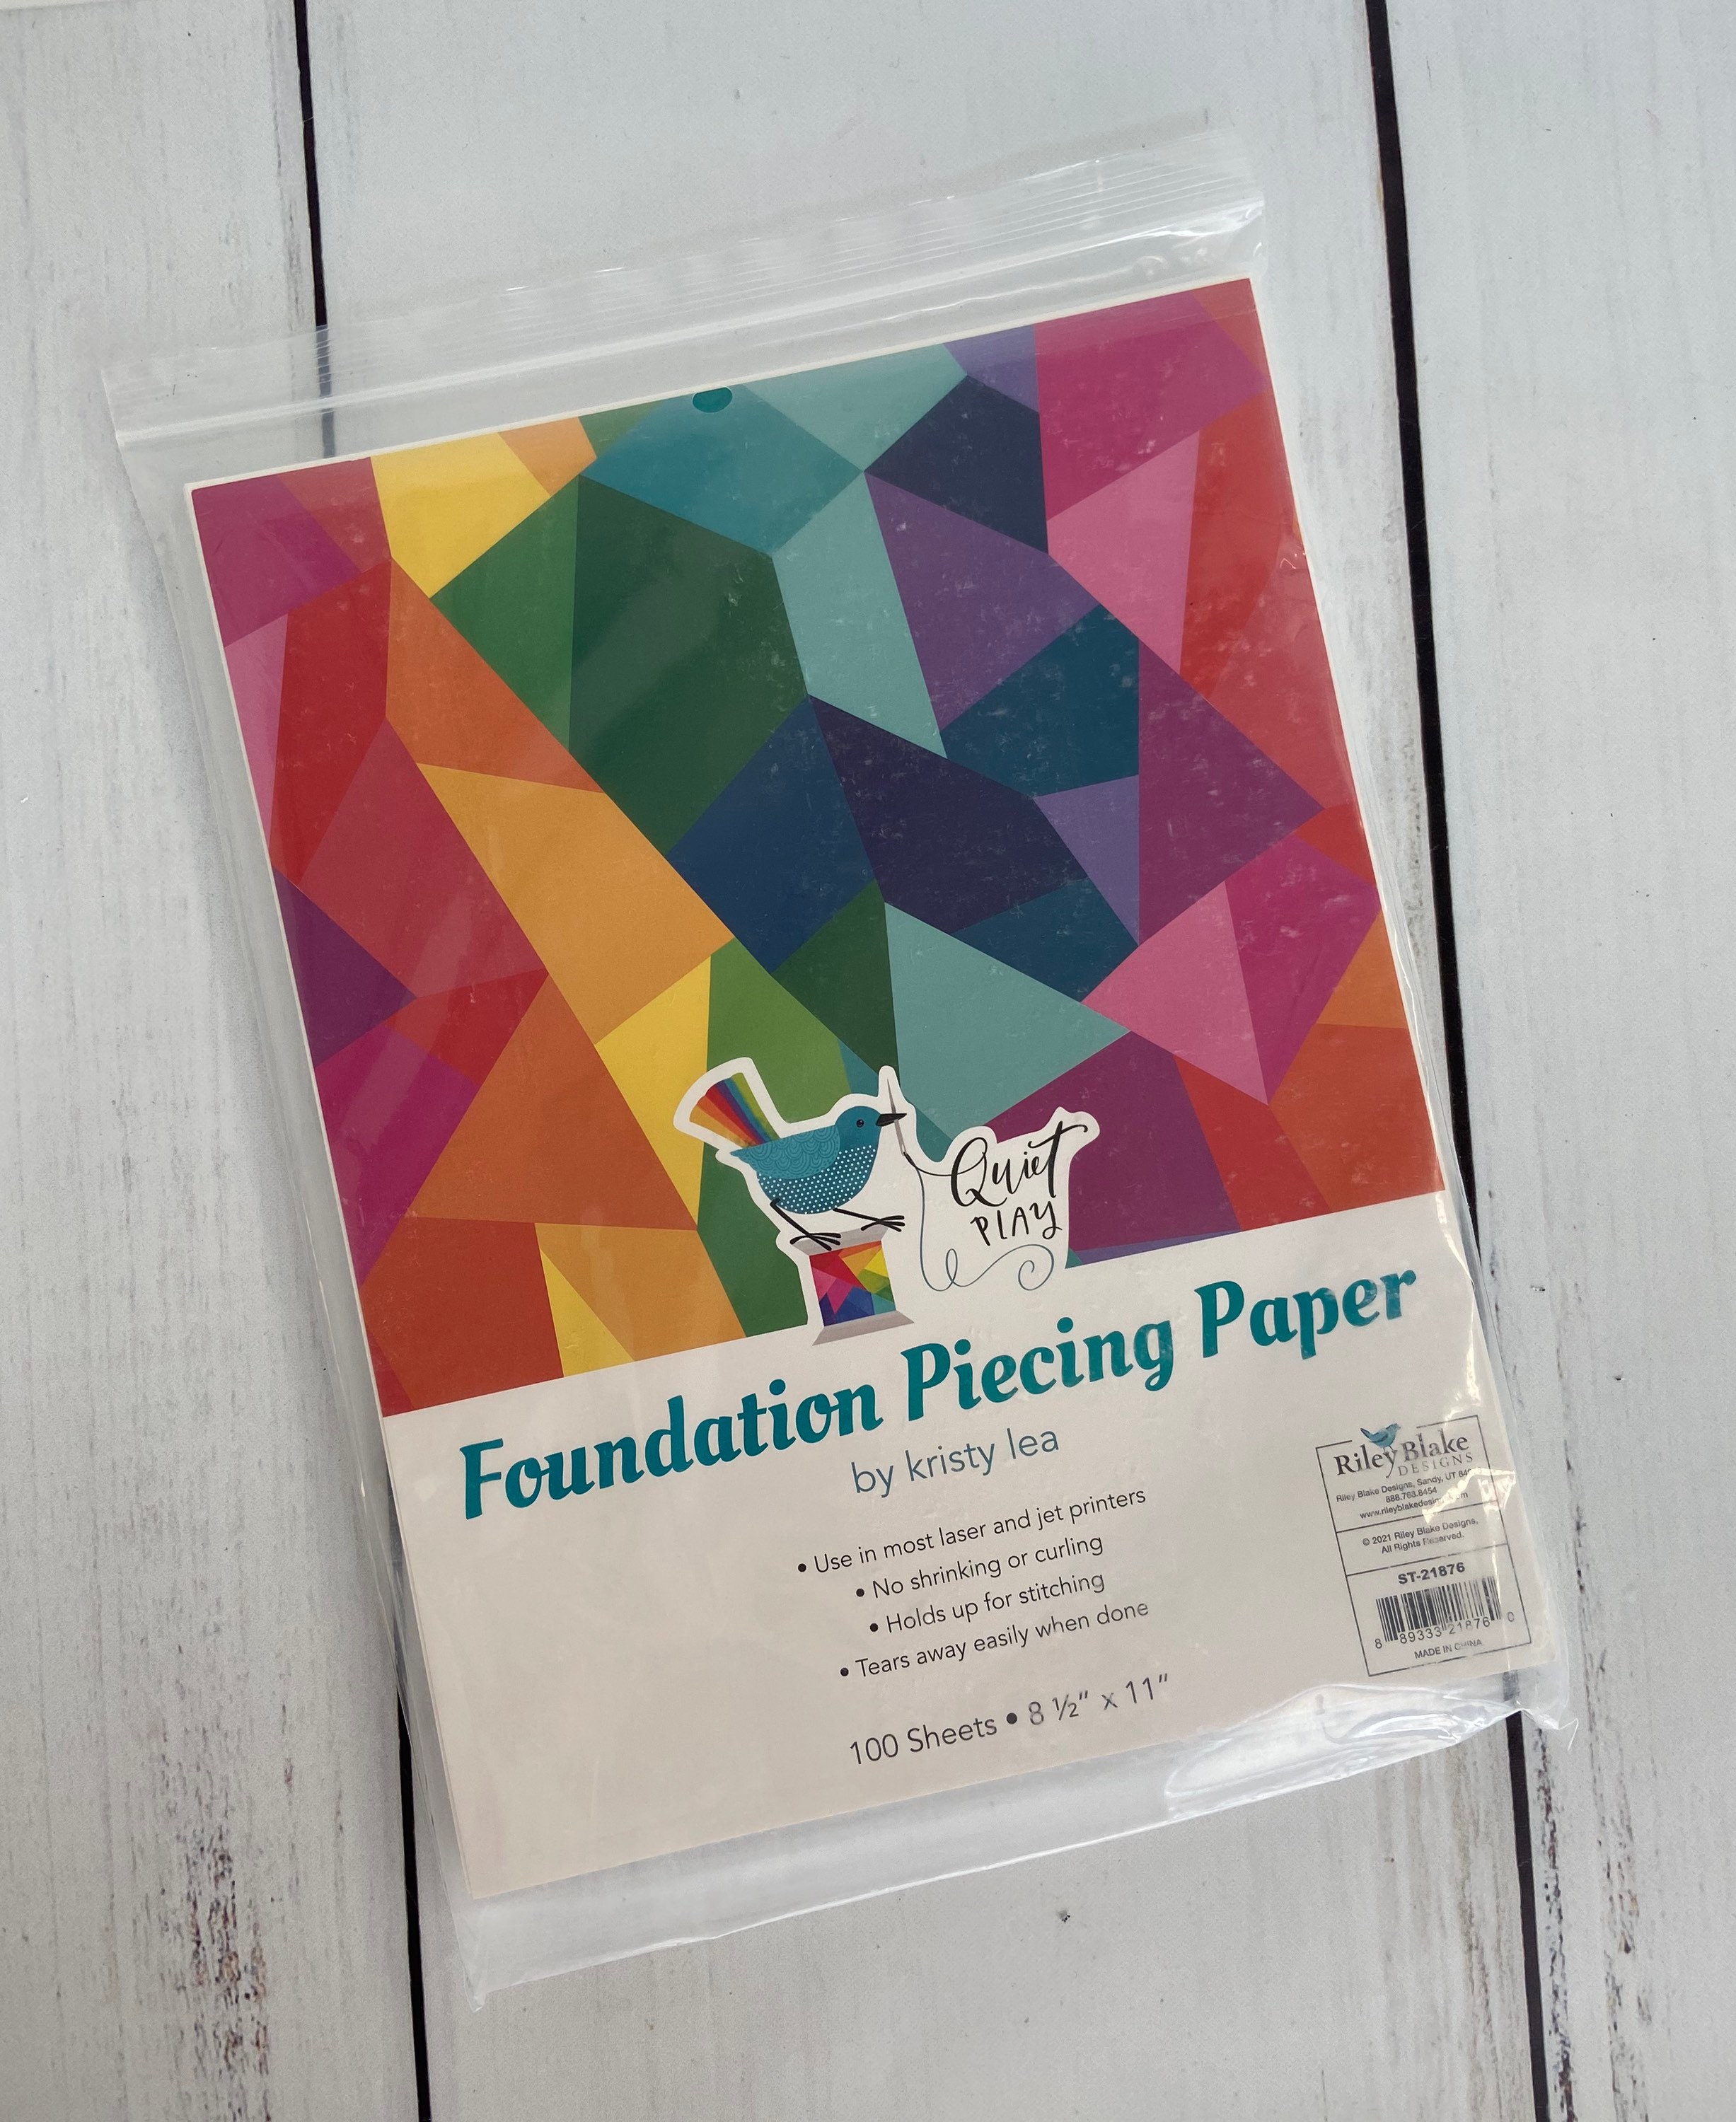 How to Foundation Paper Piece - Quiet Play